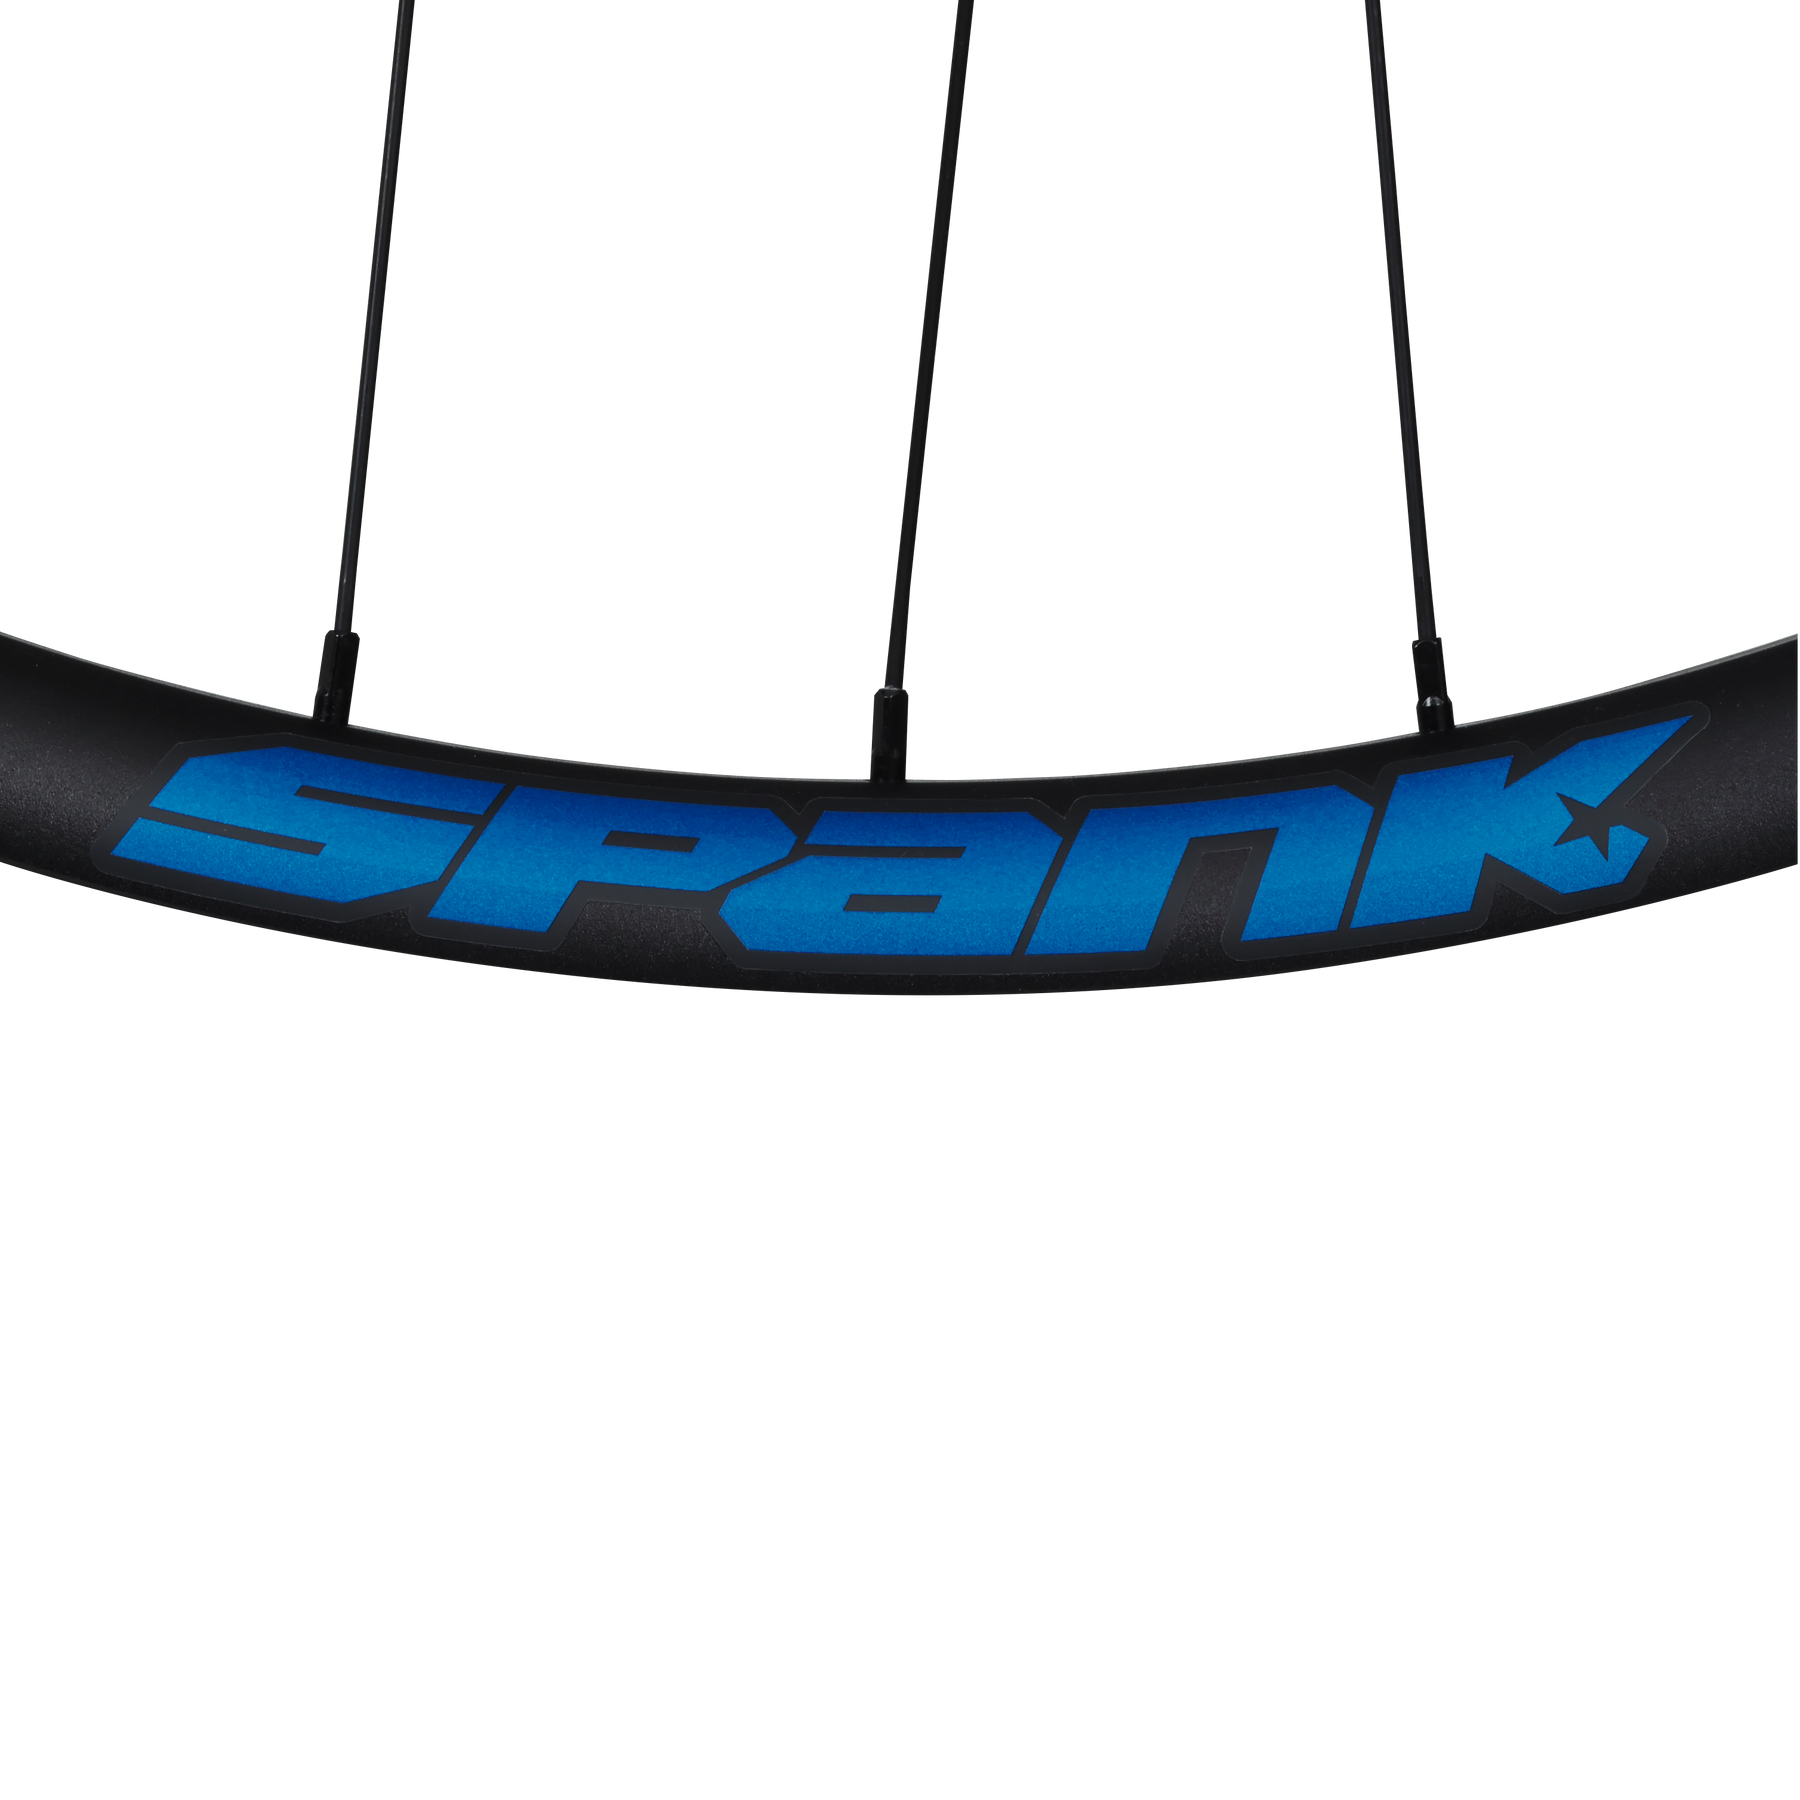 SPANK 350 Rim │ For When Things Get Gnarly │ The Gravity Cartel